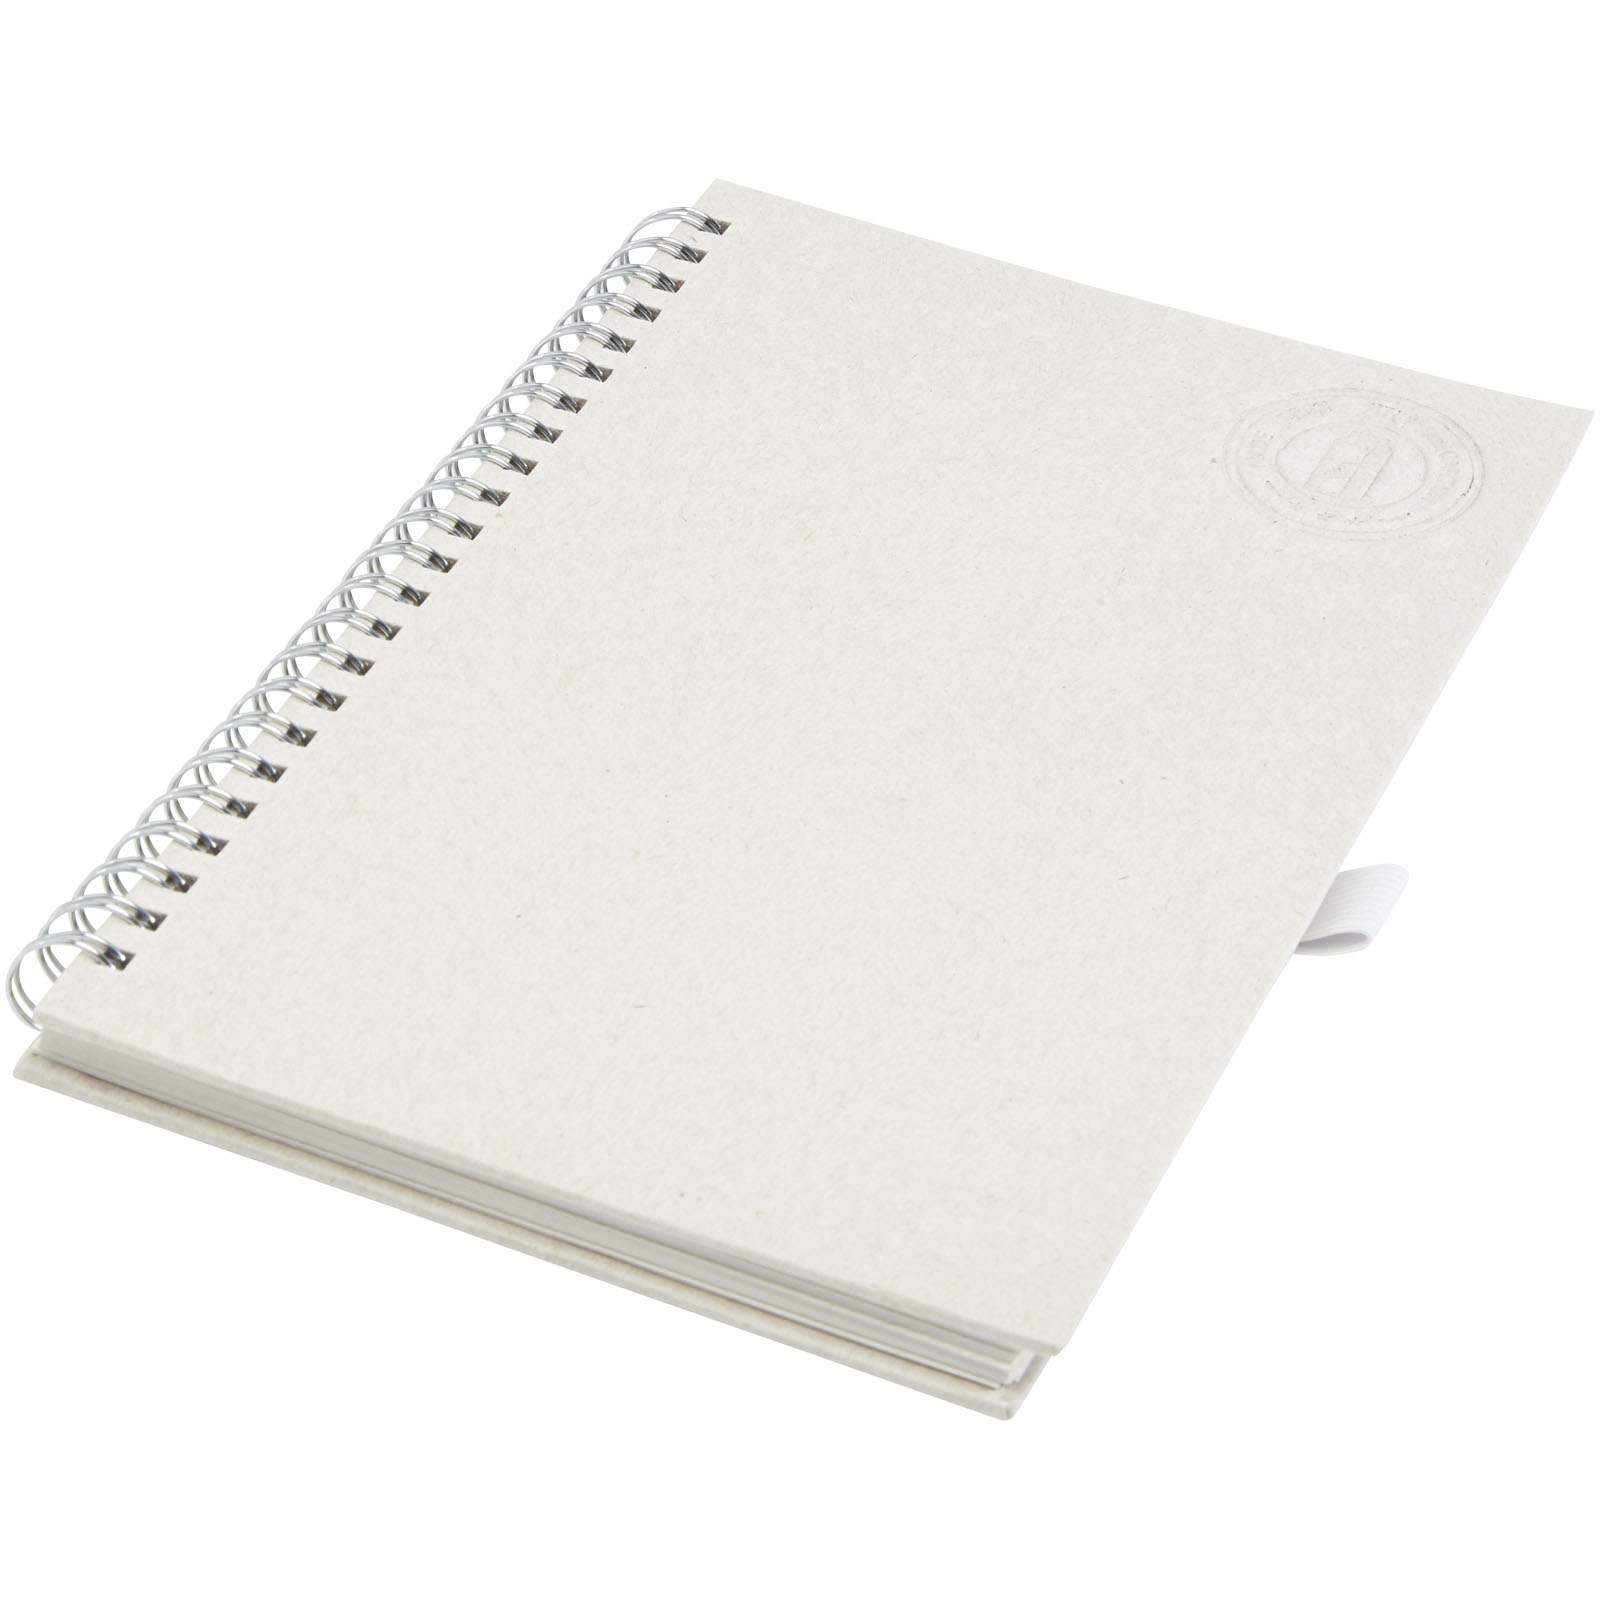 Notebooks & Desk Essentials - Dairy Dream A5 size reference recycled milk cartons spiral notebook